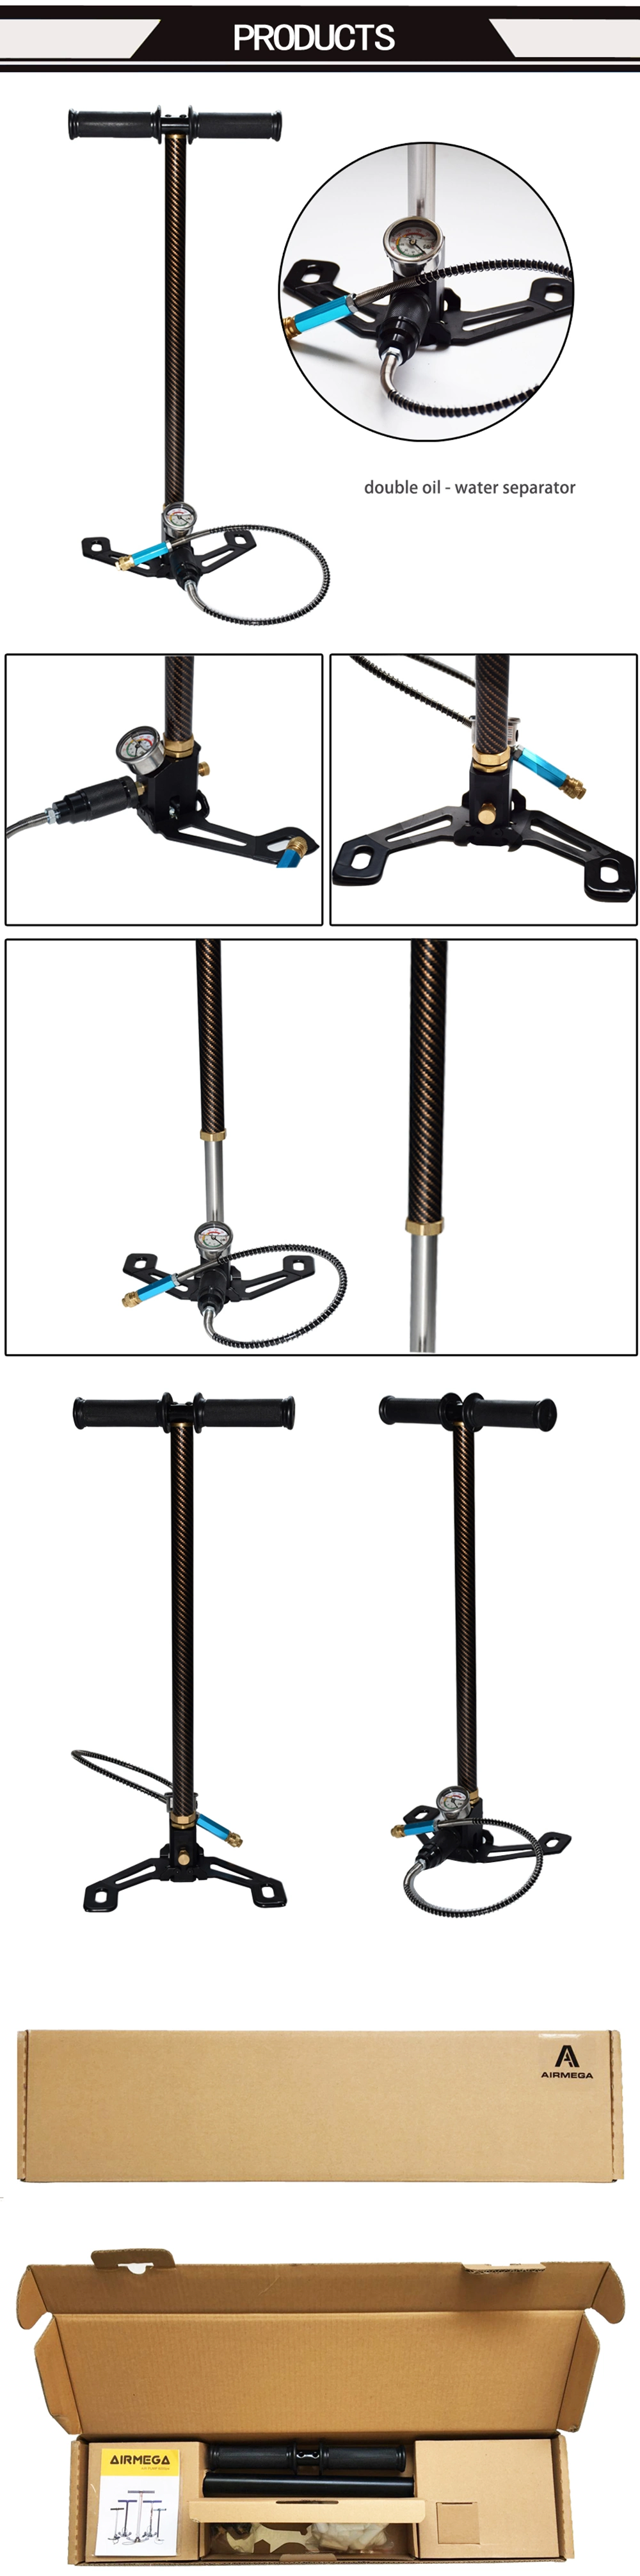 3 Stage High Pressure Hand Pump for Inflator Air Rifle 4500 Psi